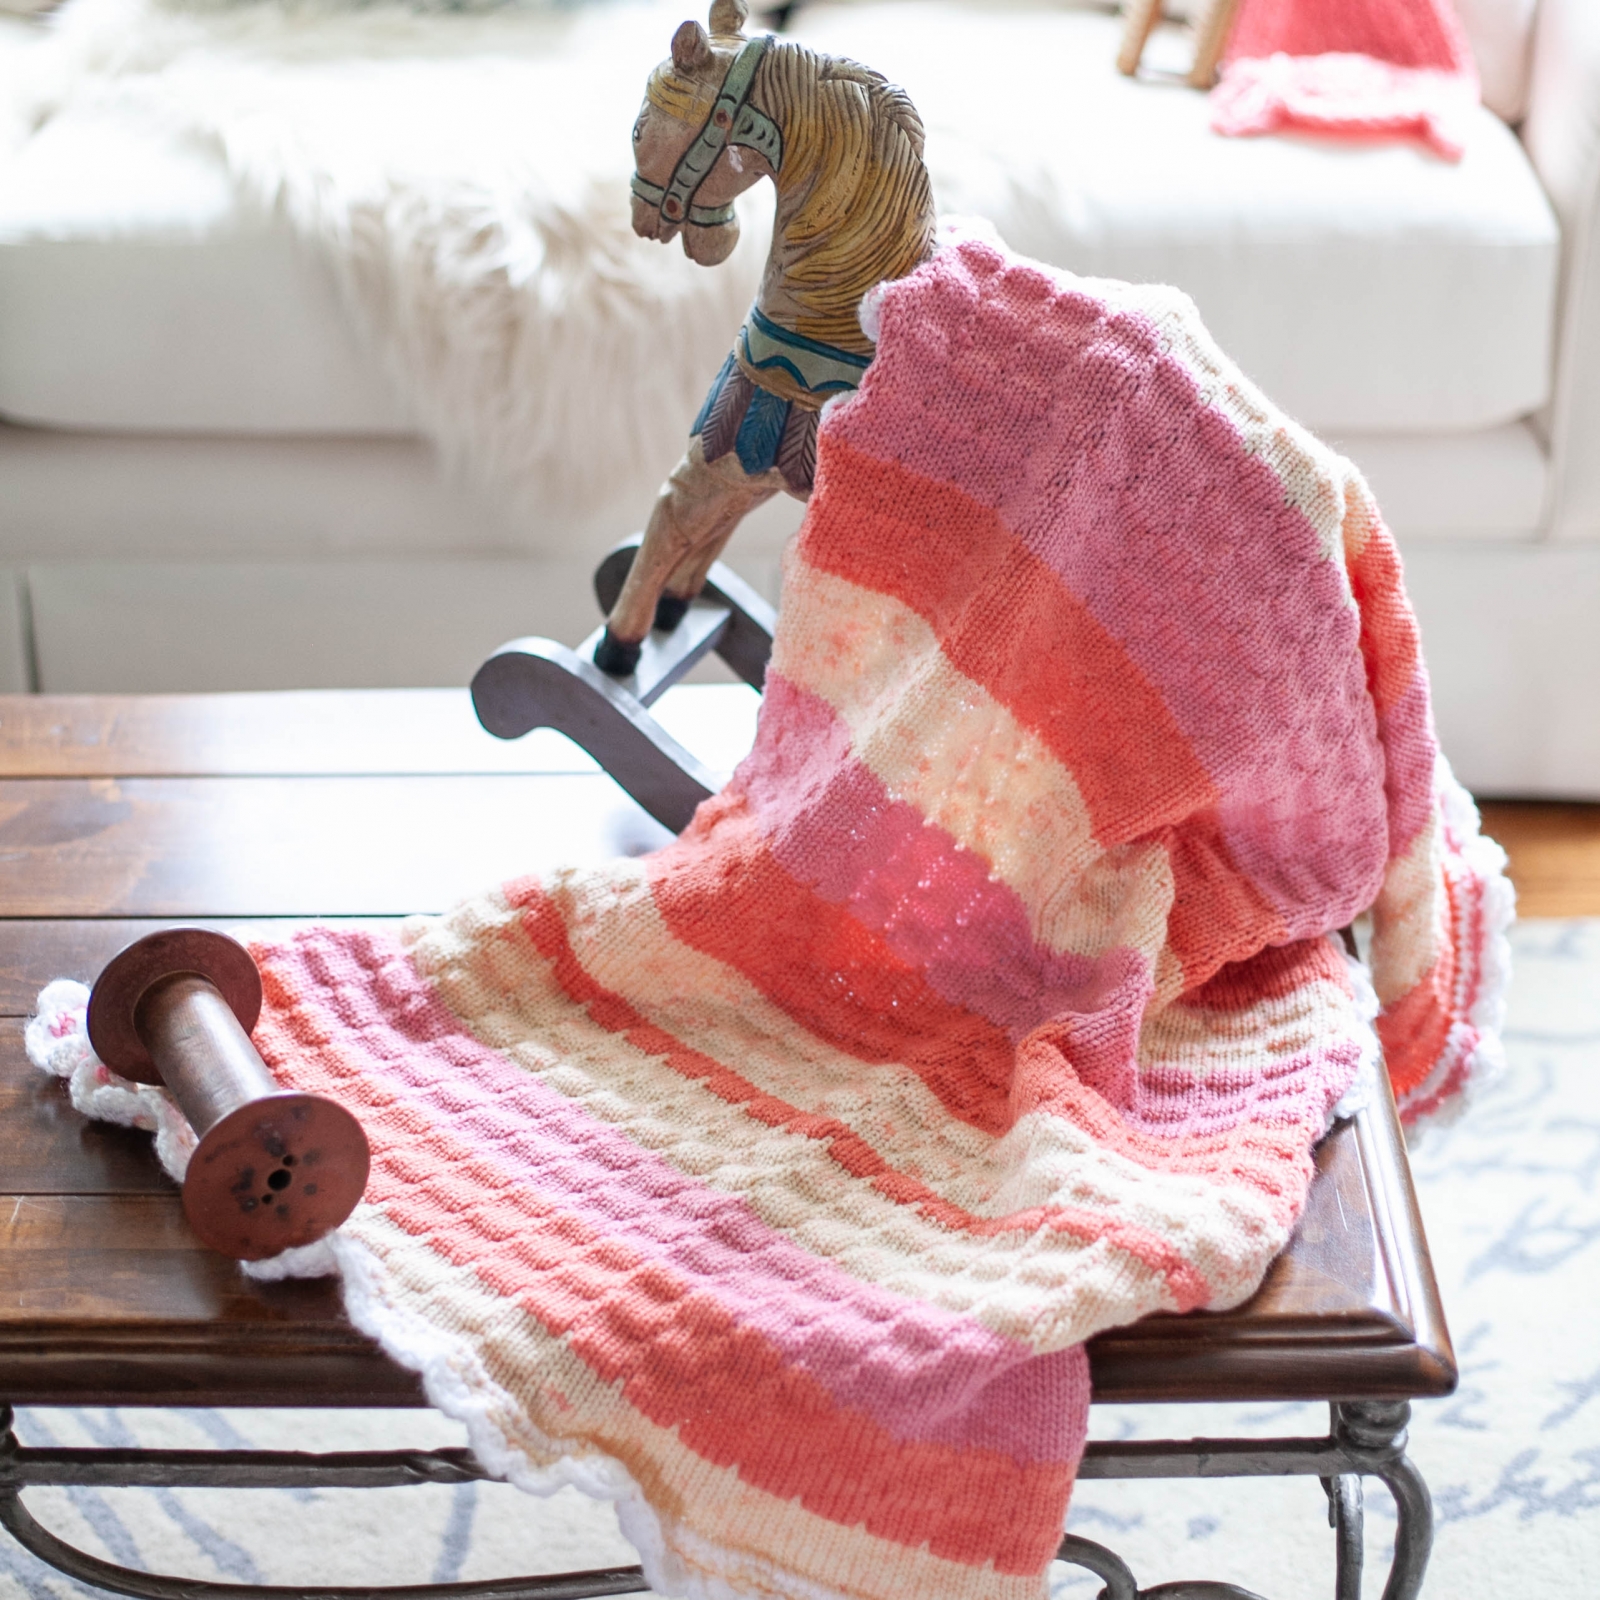 Loom Knit Baby Blanket With Crochet Edging PATTERN. | This Moment is Good